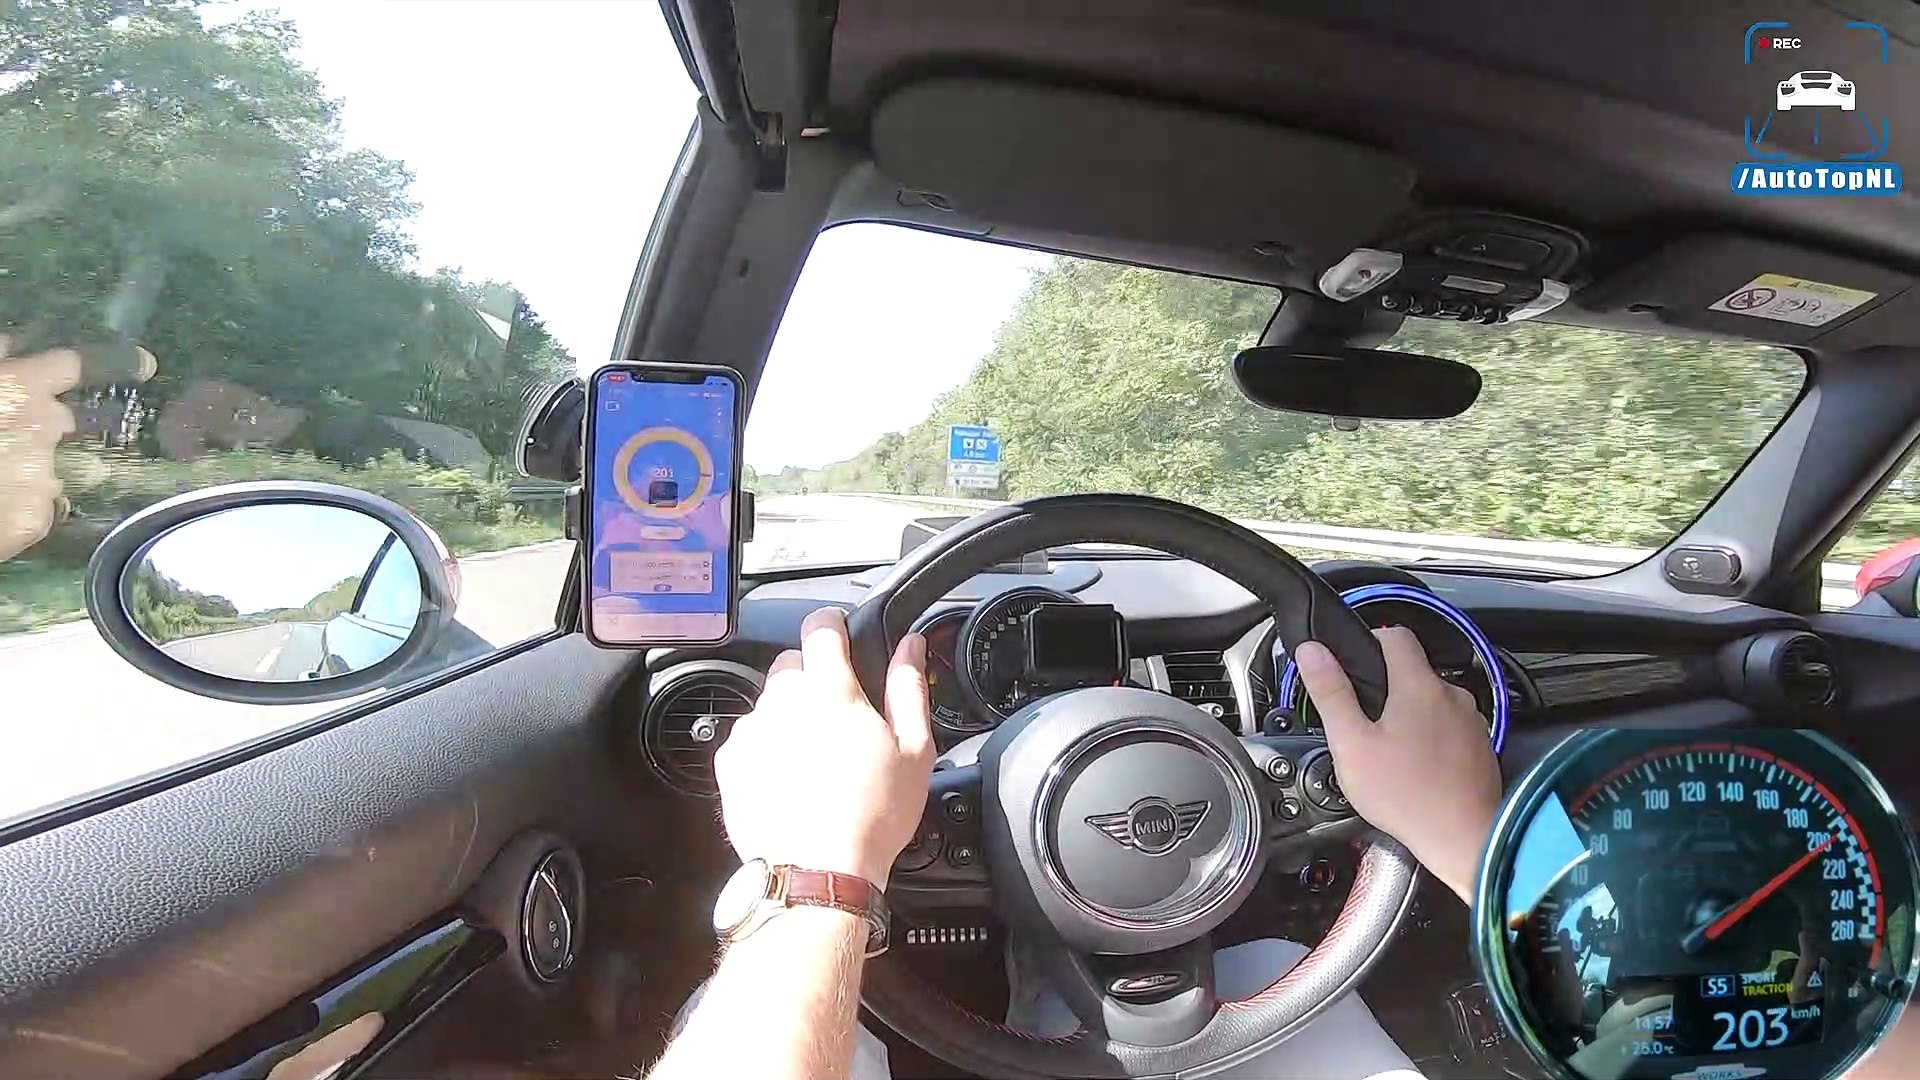 MINI JCW 231HP TOP SPEED on AUTOBAHN (NO SPEED LIMIT) by AutoTopNL